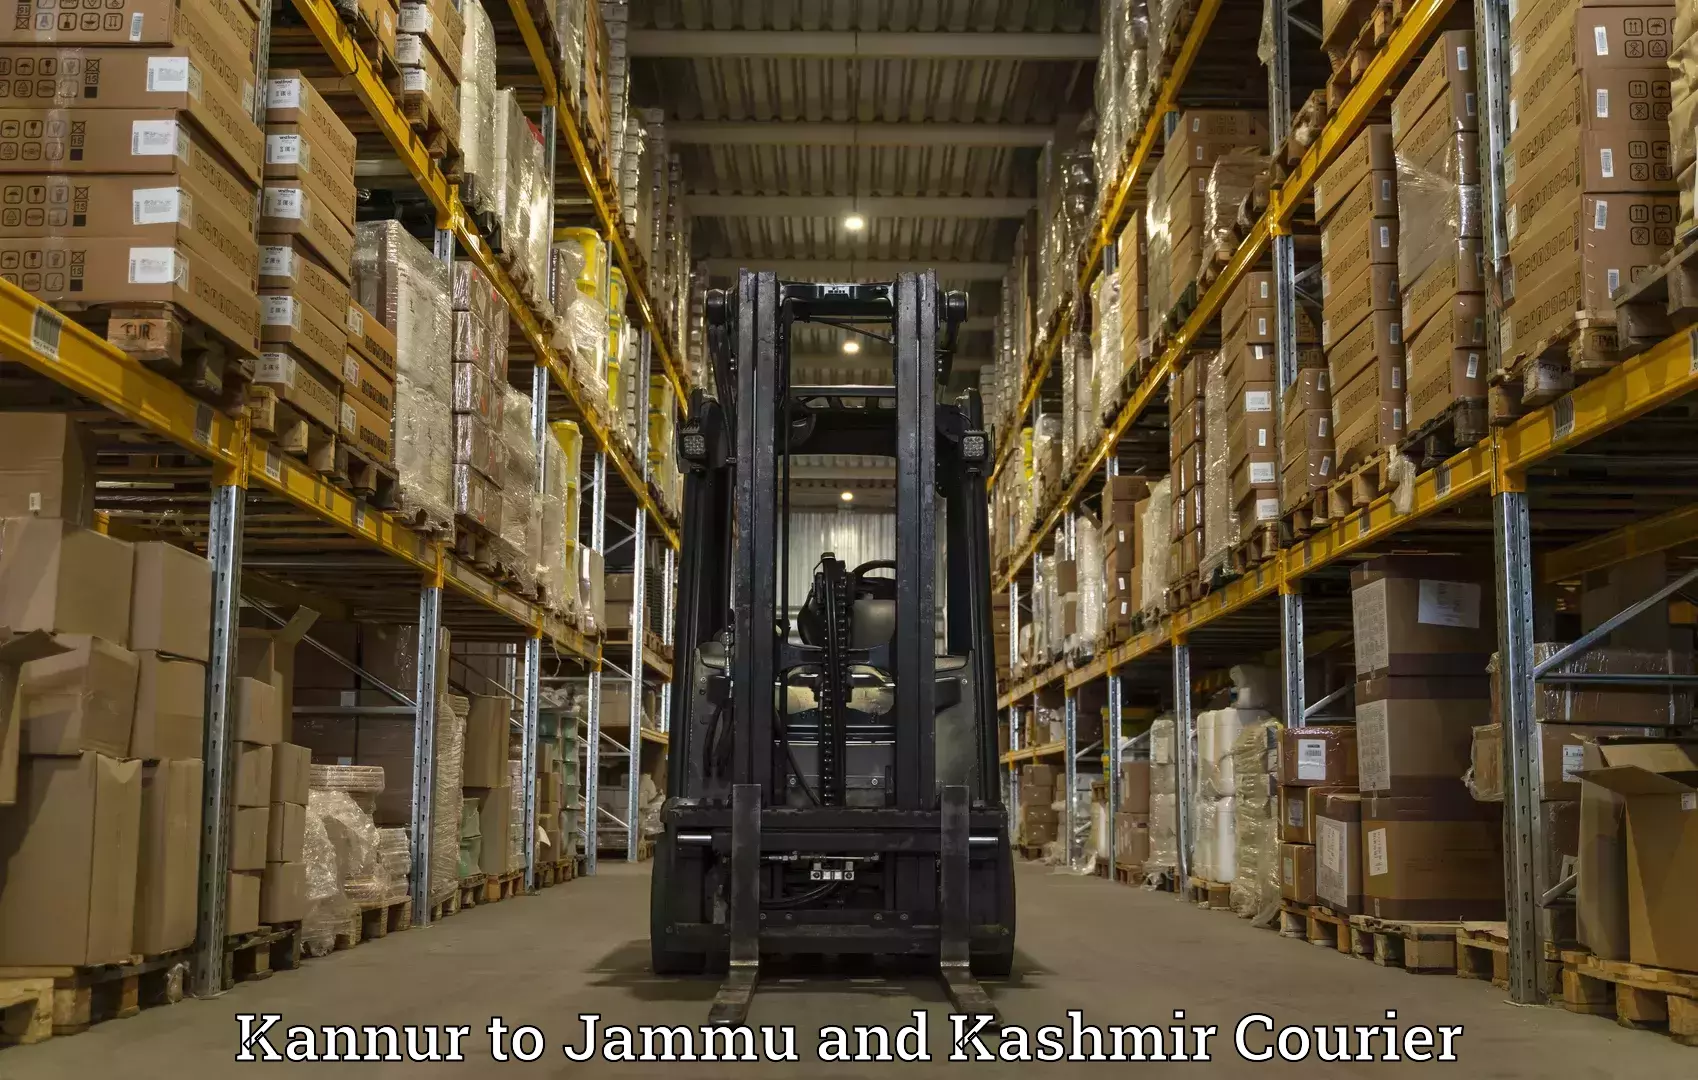 State-of-the-art courier technology in Kannur to Kargil